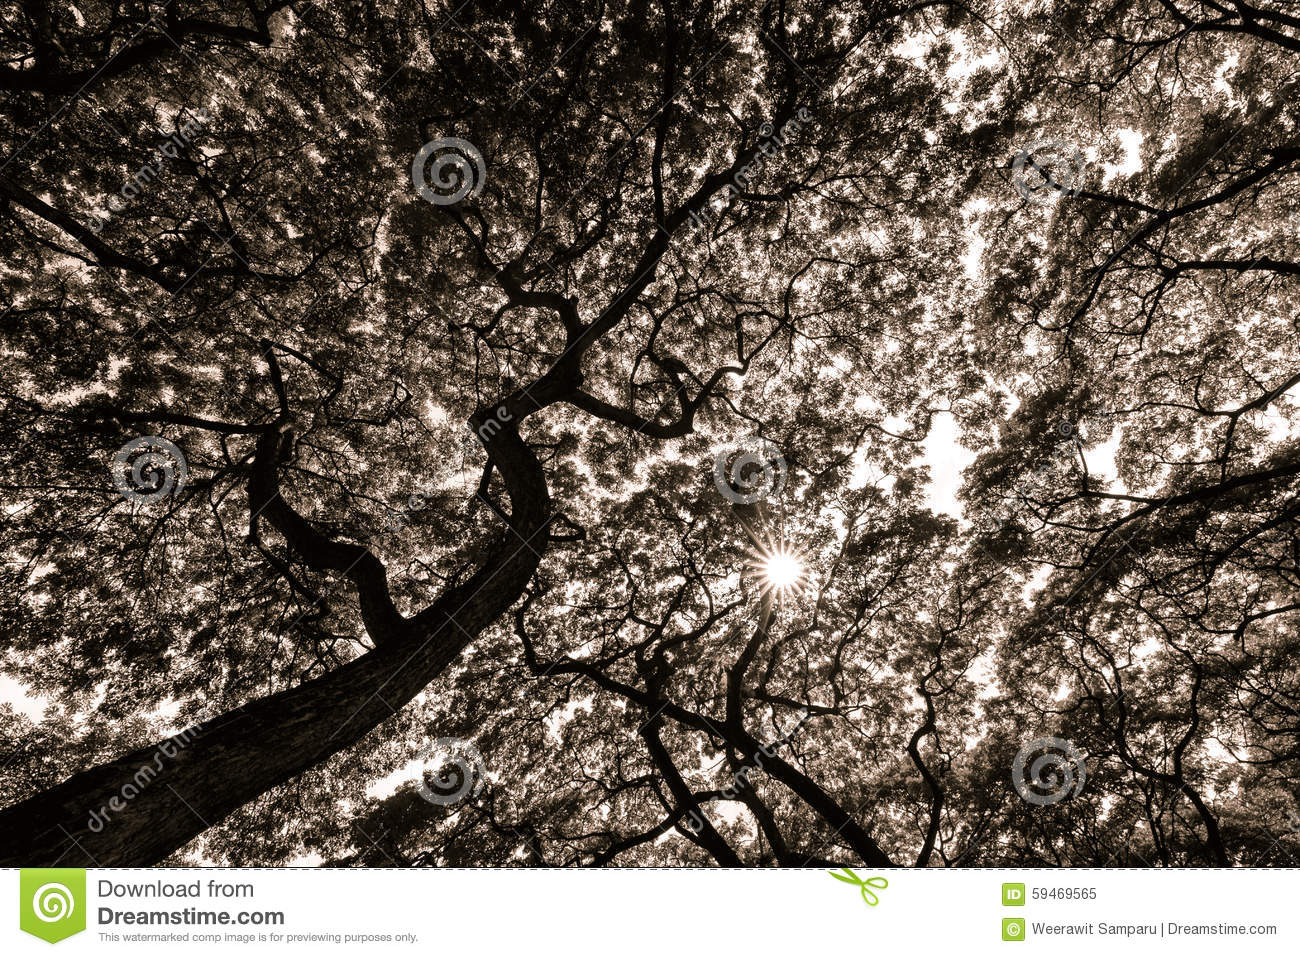 Look Up Into The Treetop Vintage Black And White Stock Photo   Image    